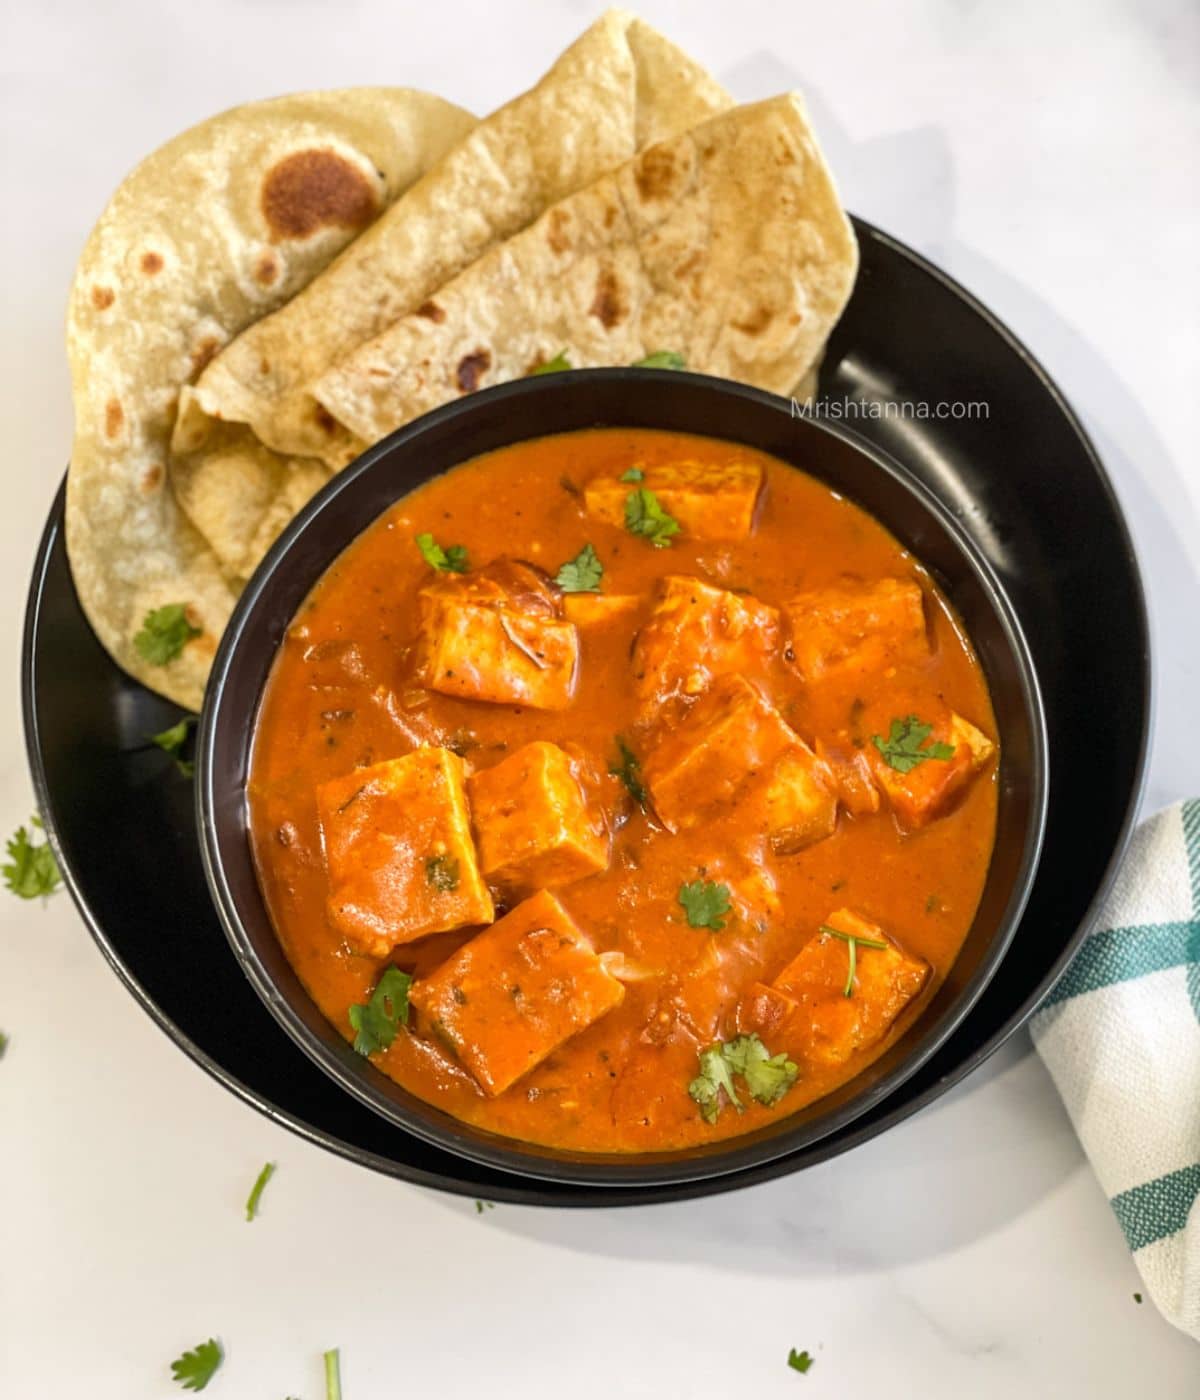 A bowl of vegan tikka masala curry is on the plate with chapati.